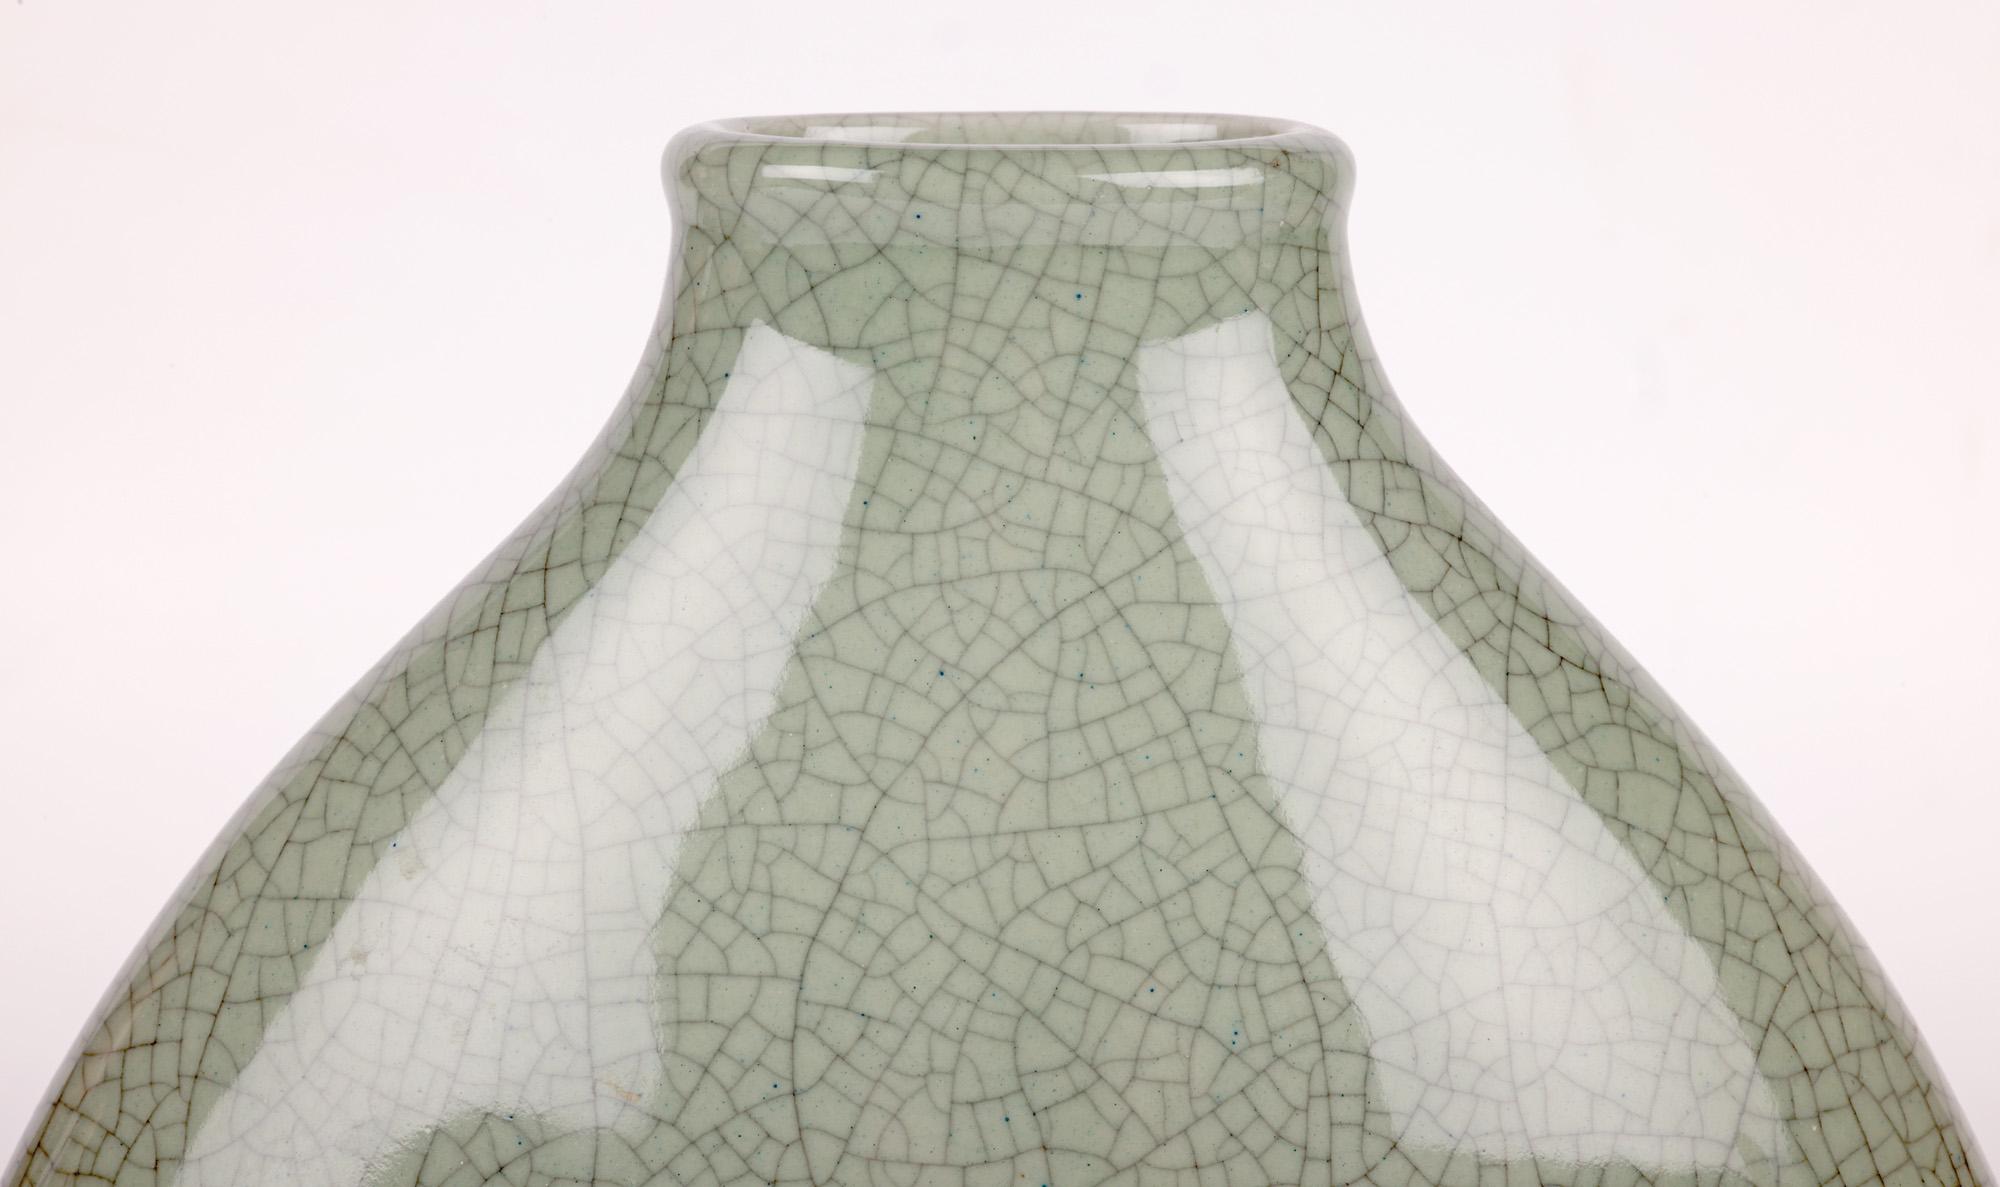 A very stylish South East Asian porcelain celadon craquelure glazed bottle shaped vase probably Chinese or Korean and dating from the 20th century. The finely made vase is of flattened oval shape with a wide narrow oval shaped unglazed foot and